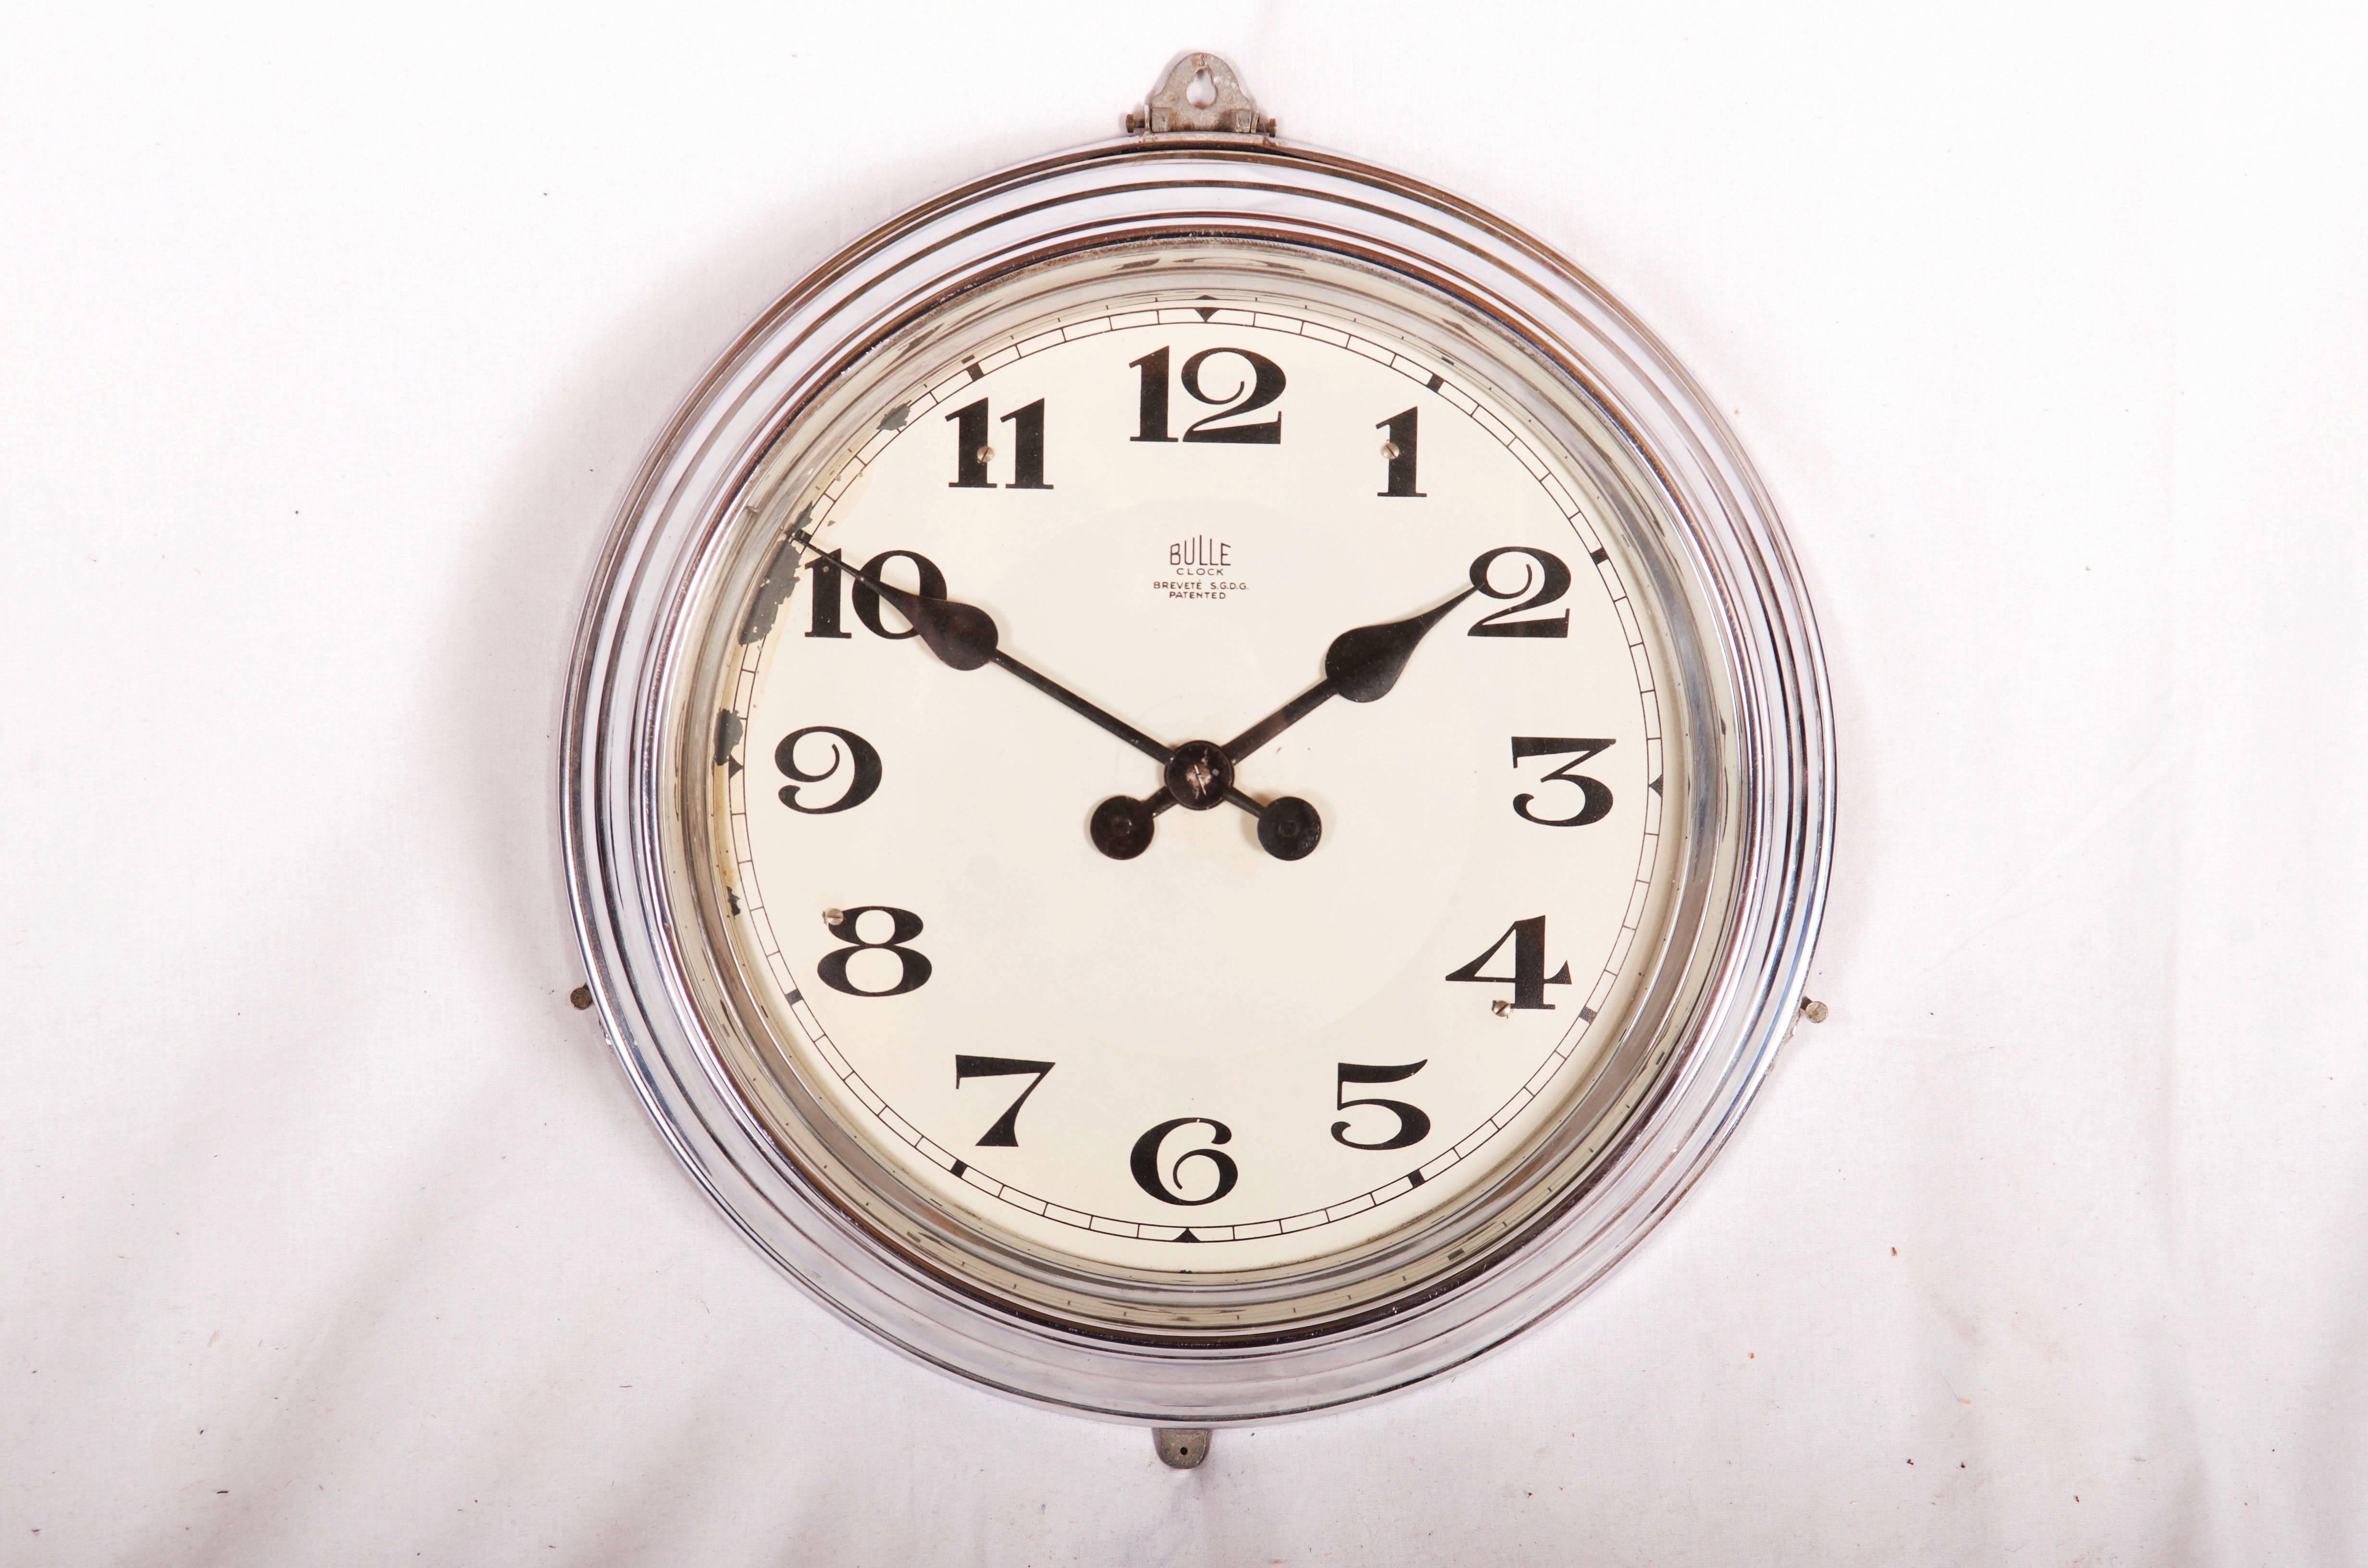 This clock was produced in the years 1920s by Bulle Clock in France.
Patented in France by Maurice Favre-Bulle and Marcel Moulin.
Bulle clocks have pendulum impulse, which swings over solid three-pole magnet.
Compared to other electric clocks of